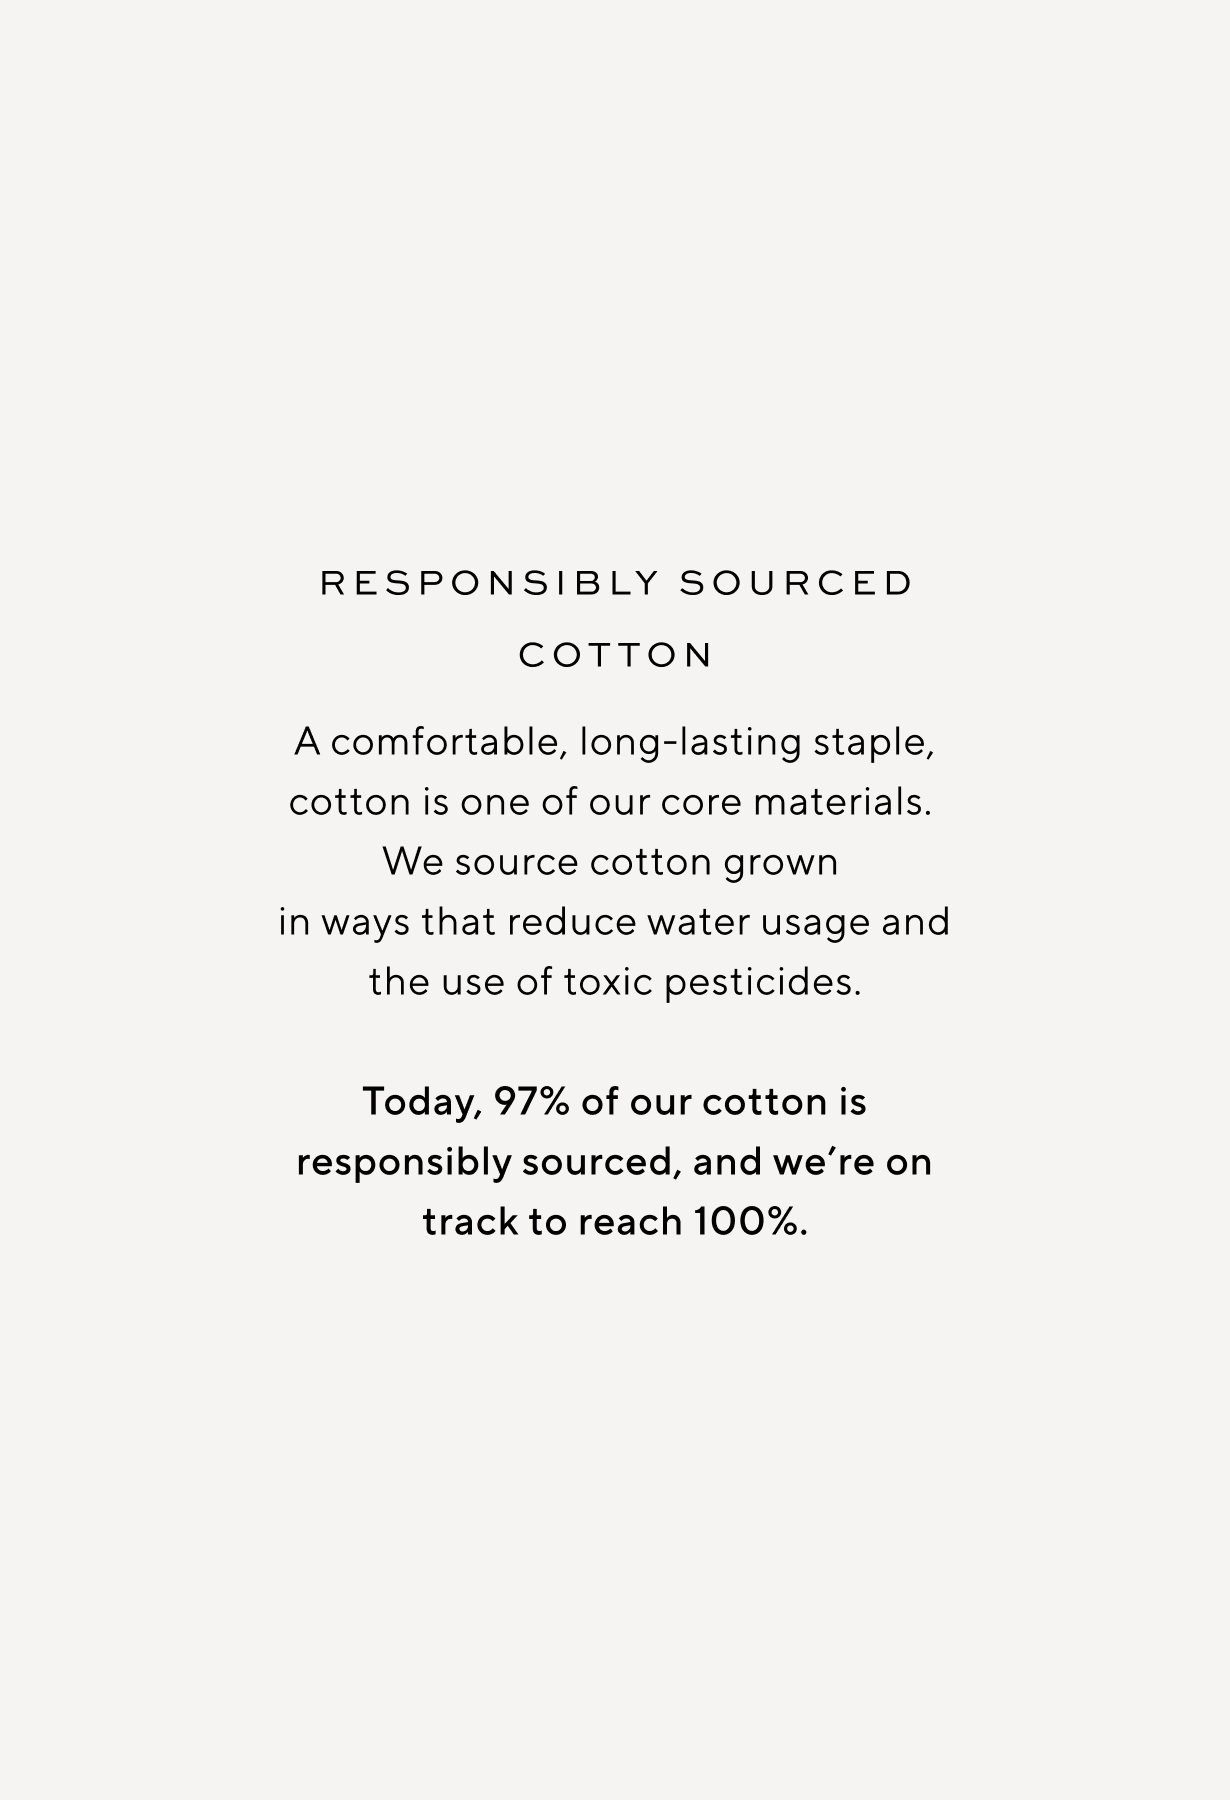 Responsibly Sourced Cotton